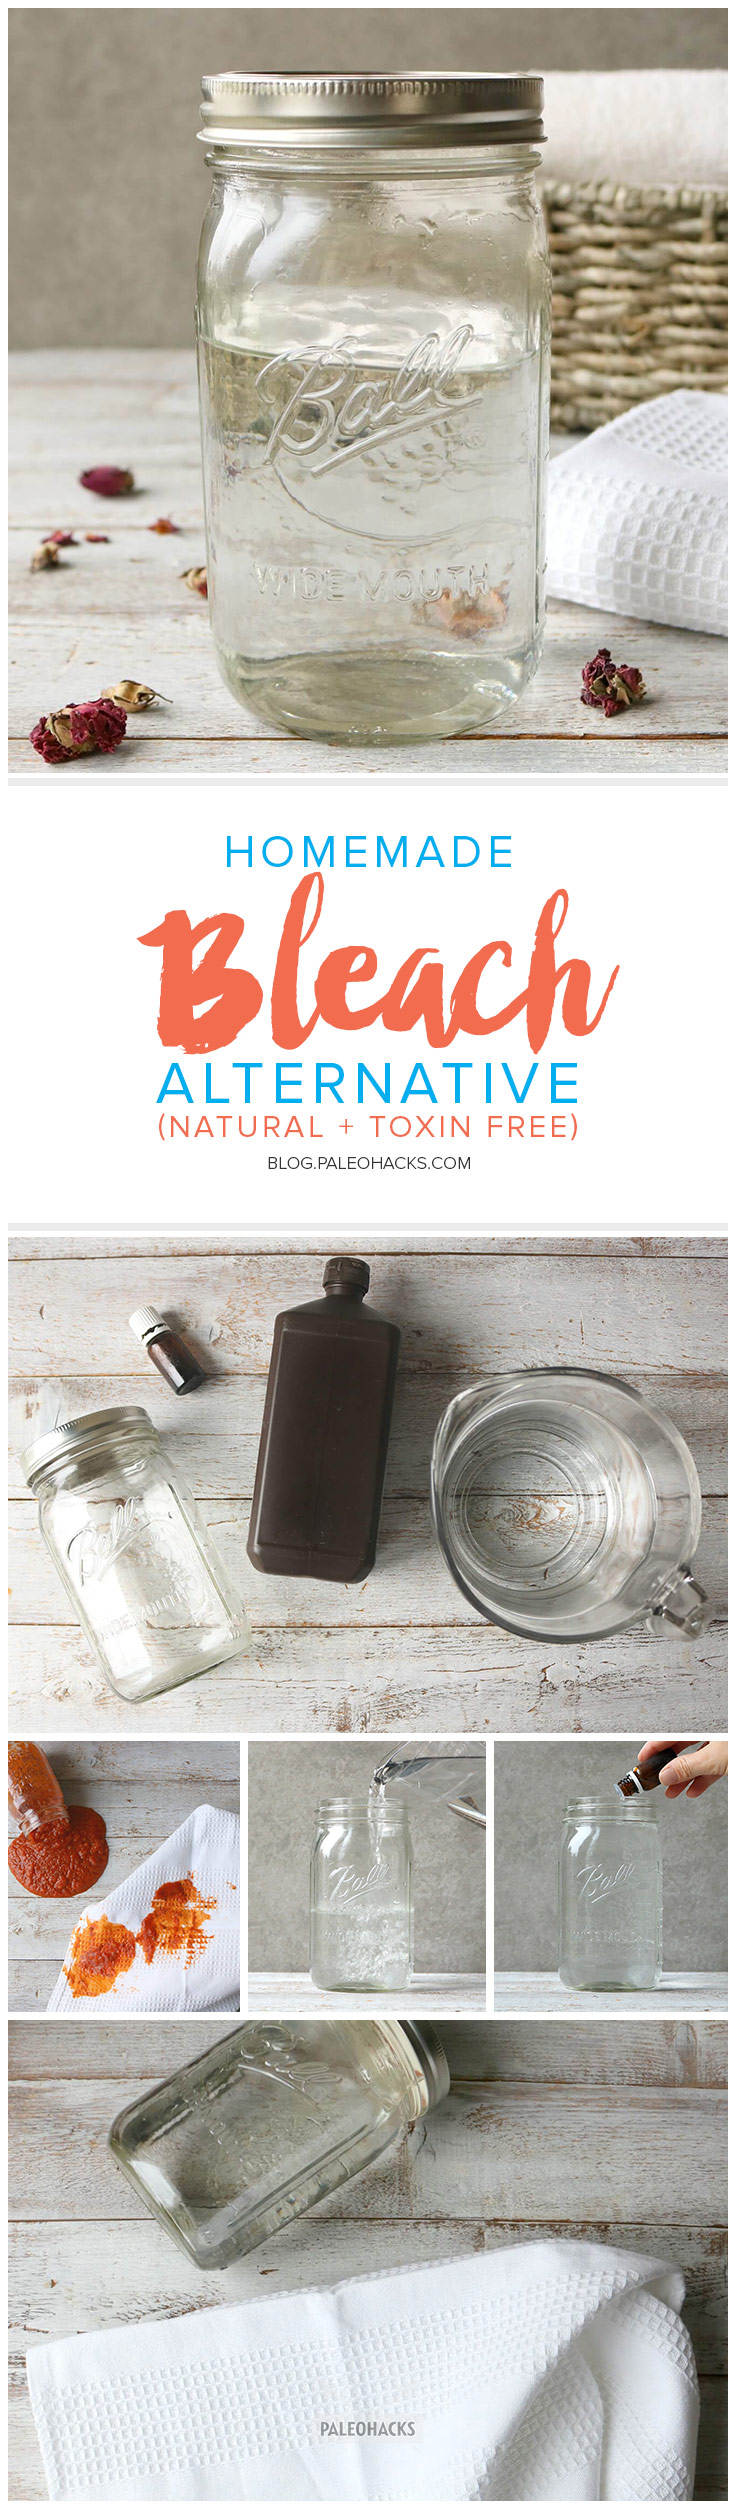 Brighten laundry, disinfect bathrooms and kill germs with this chemical-free DIY bleach alternative.